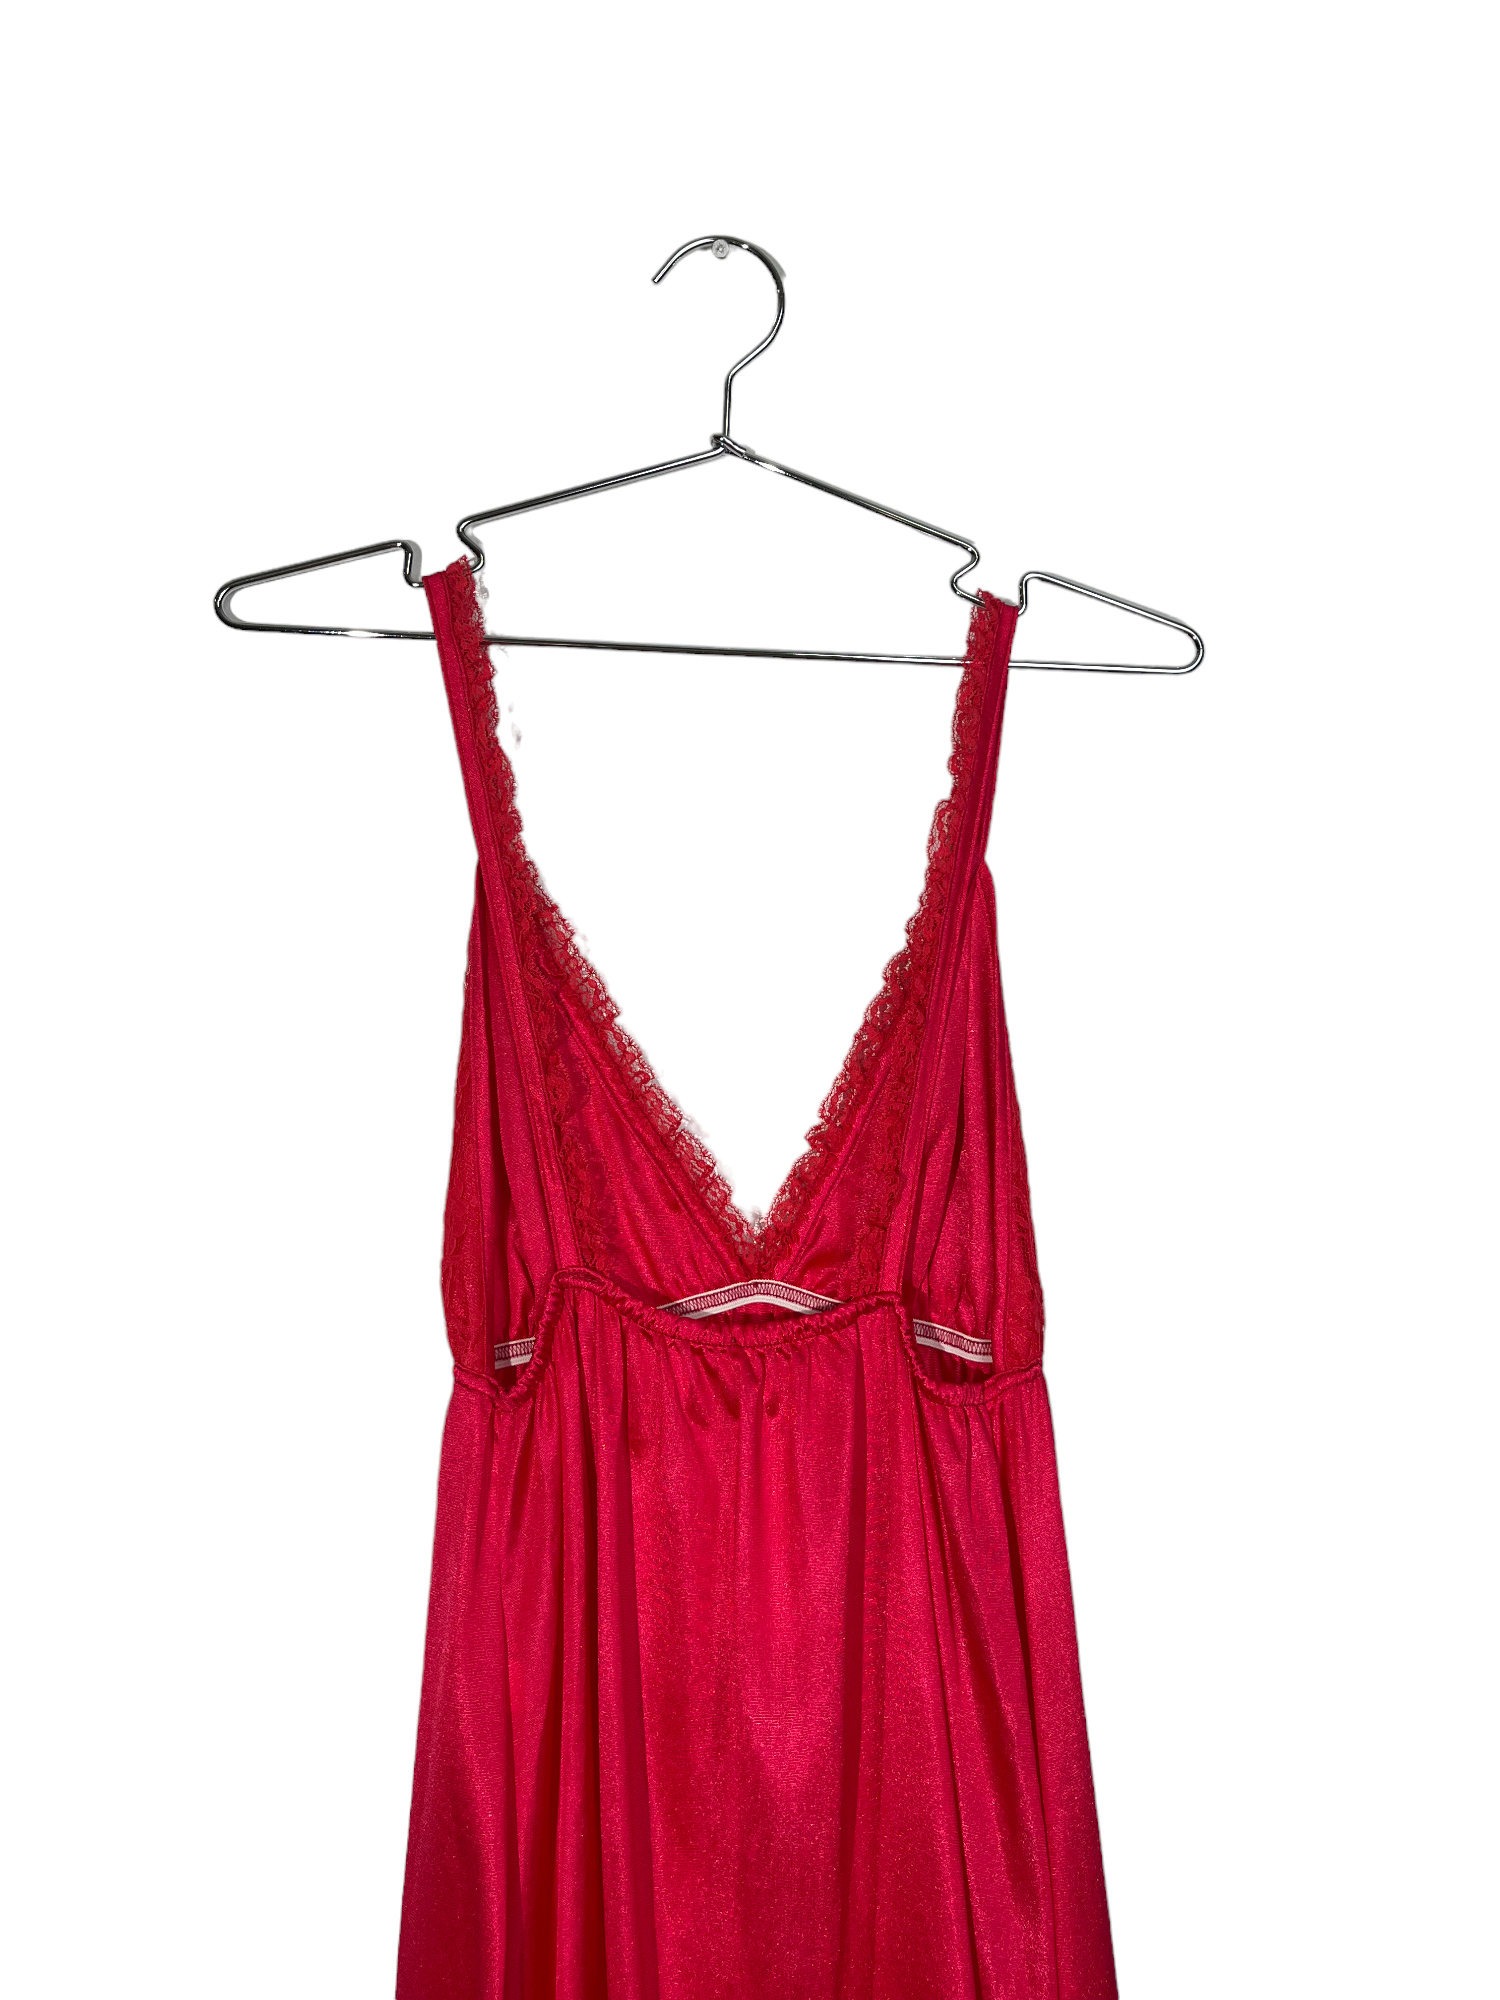 Red Lacy Babydoll Dress